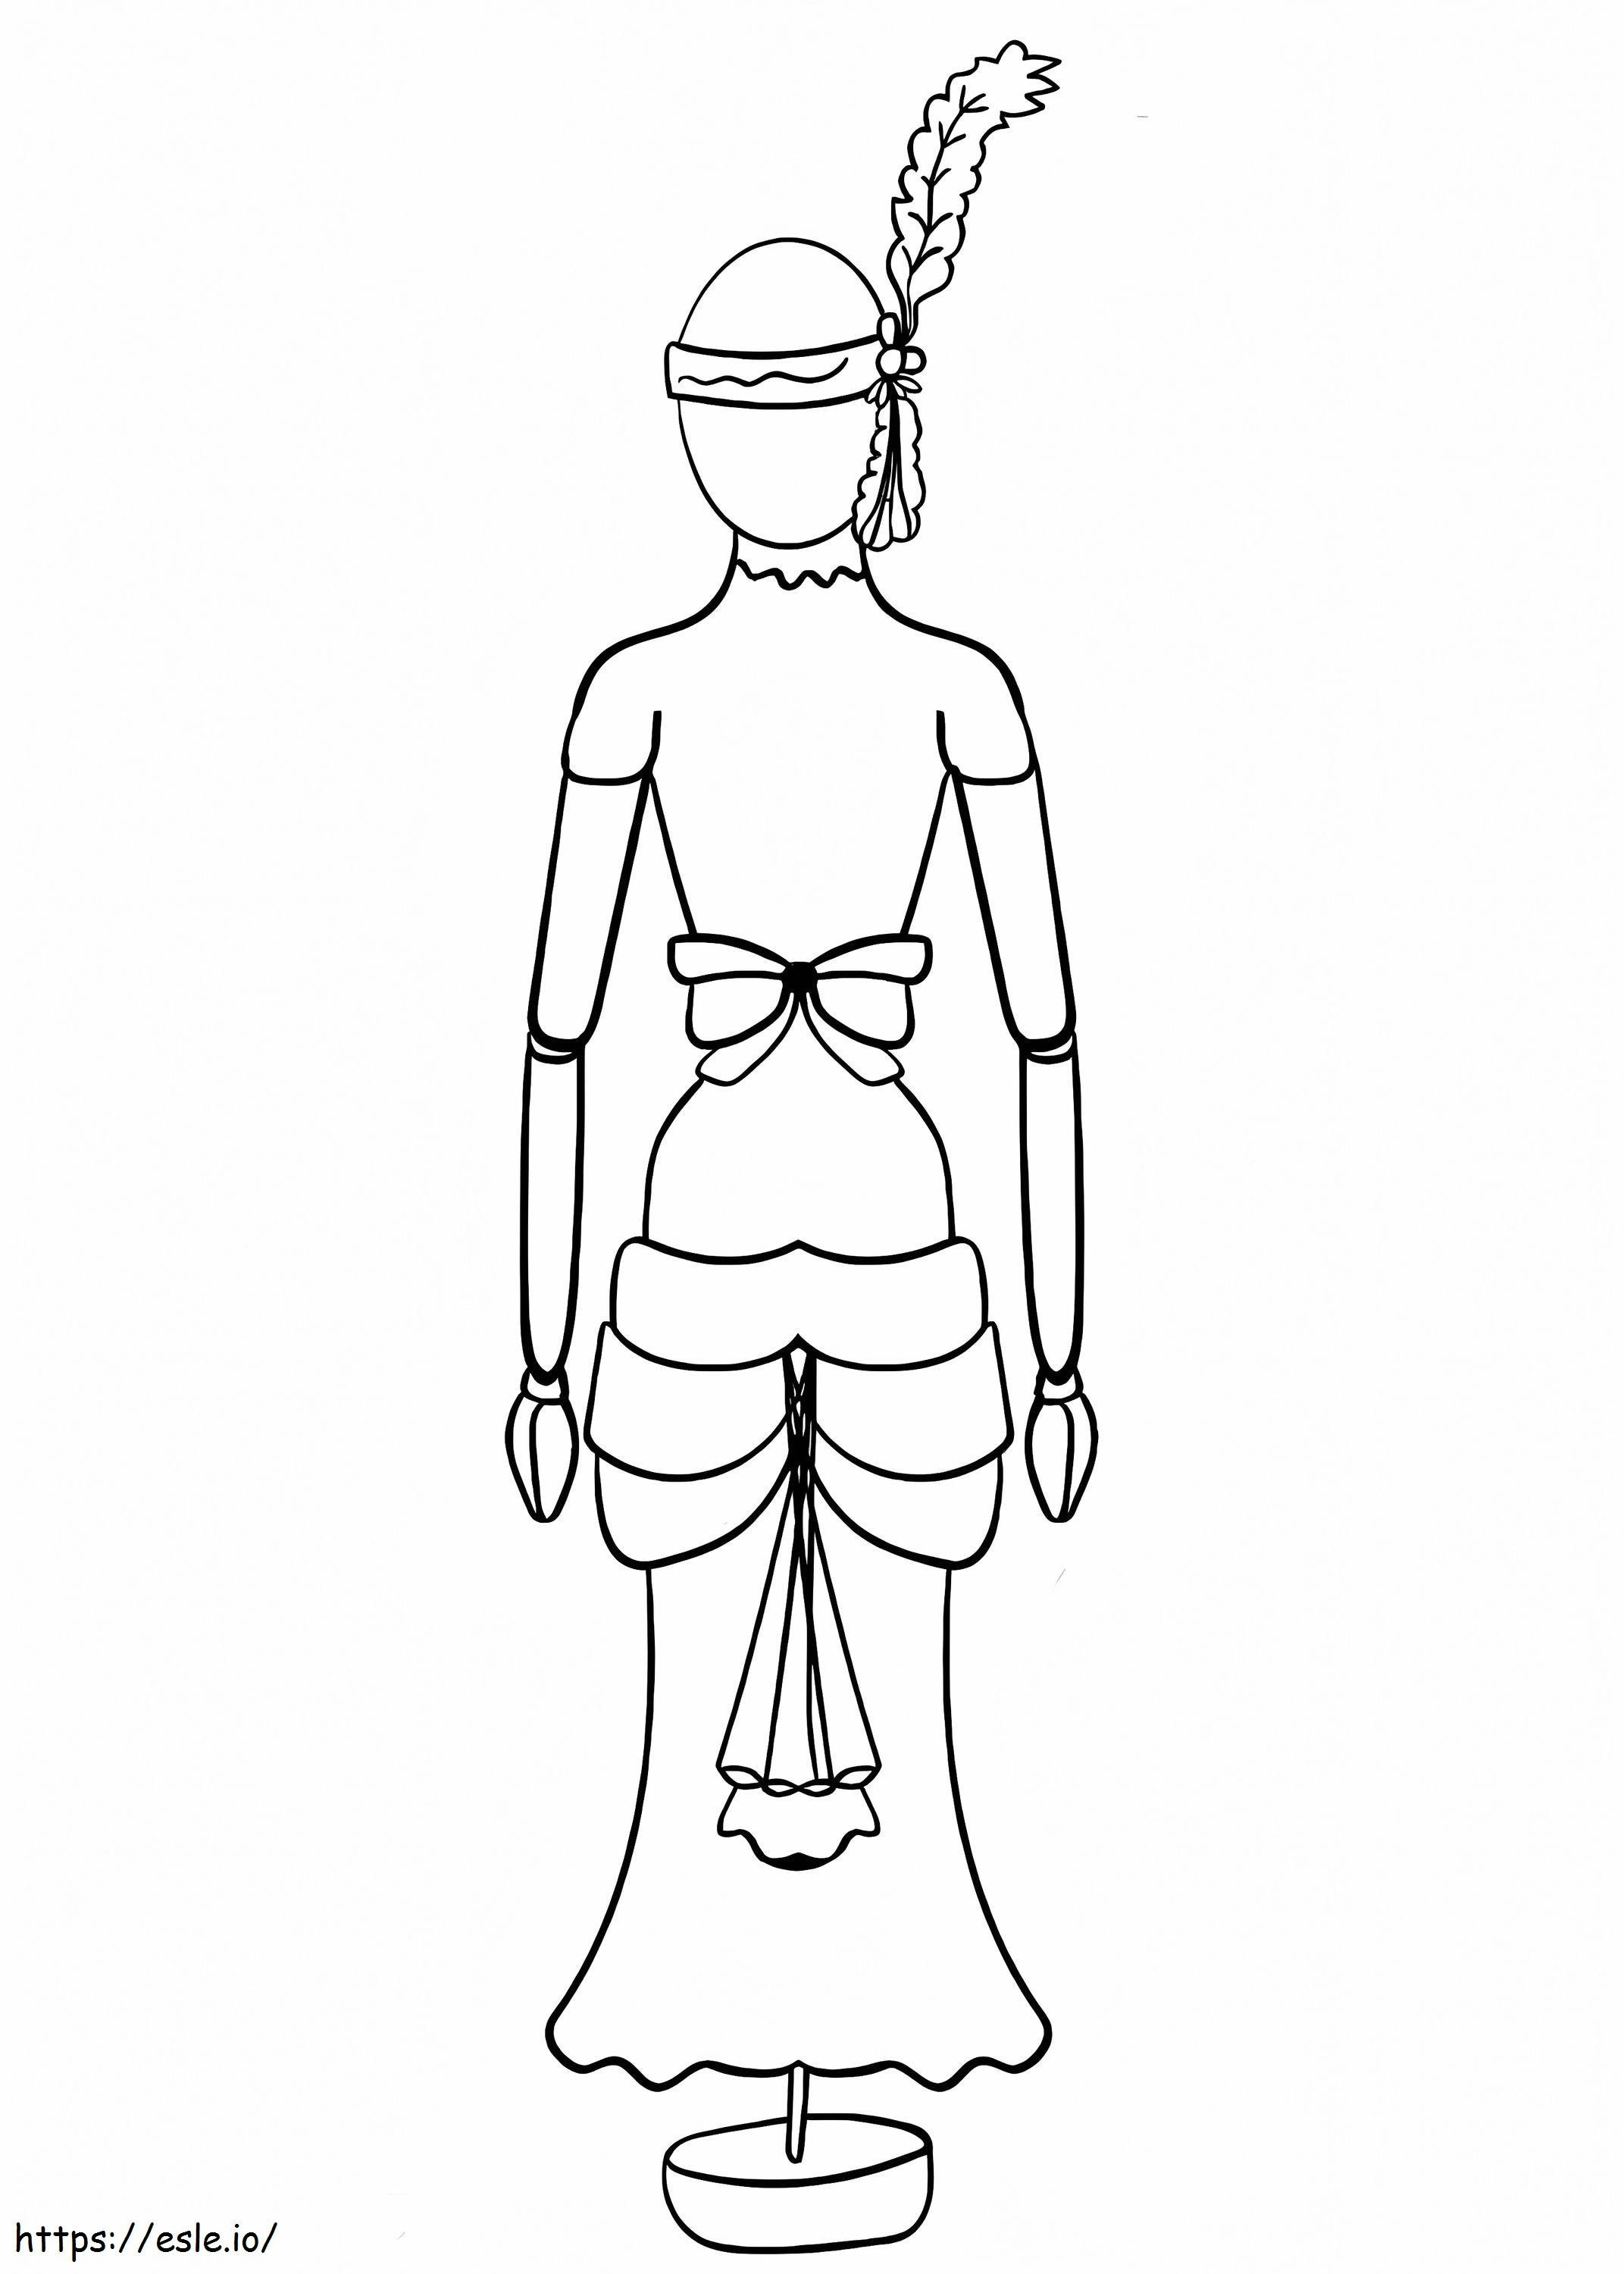 Mannequin With Dress coloring page